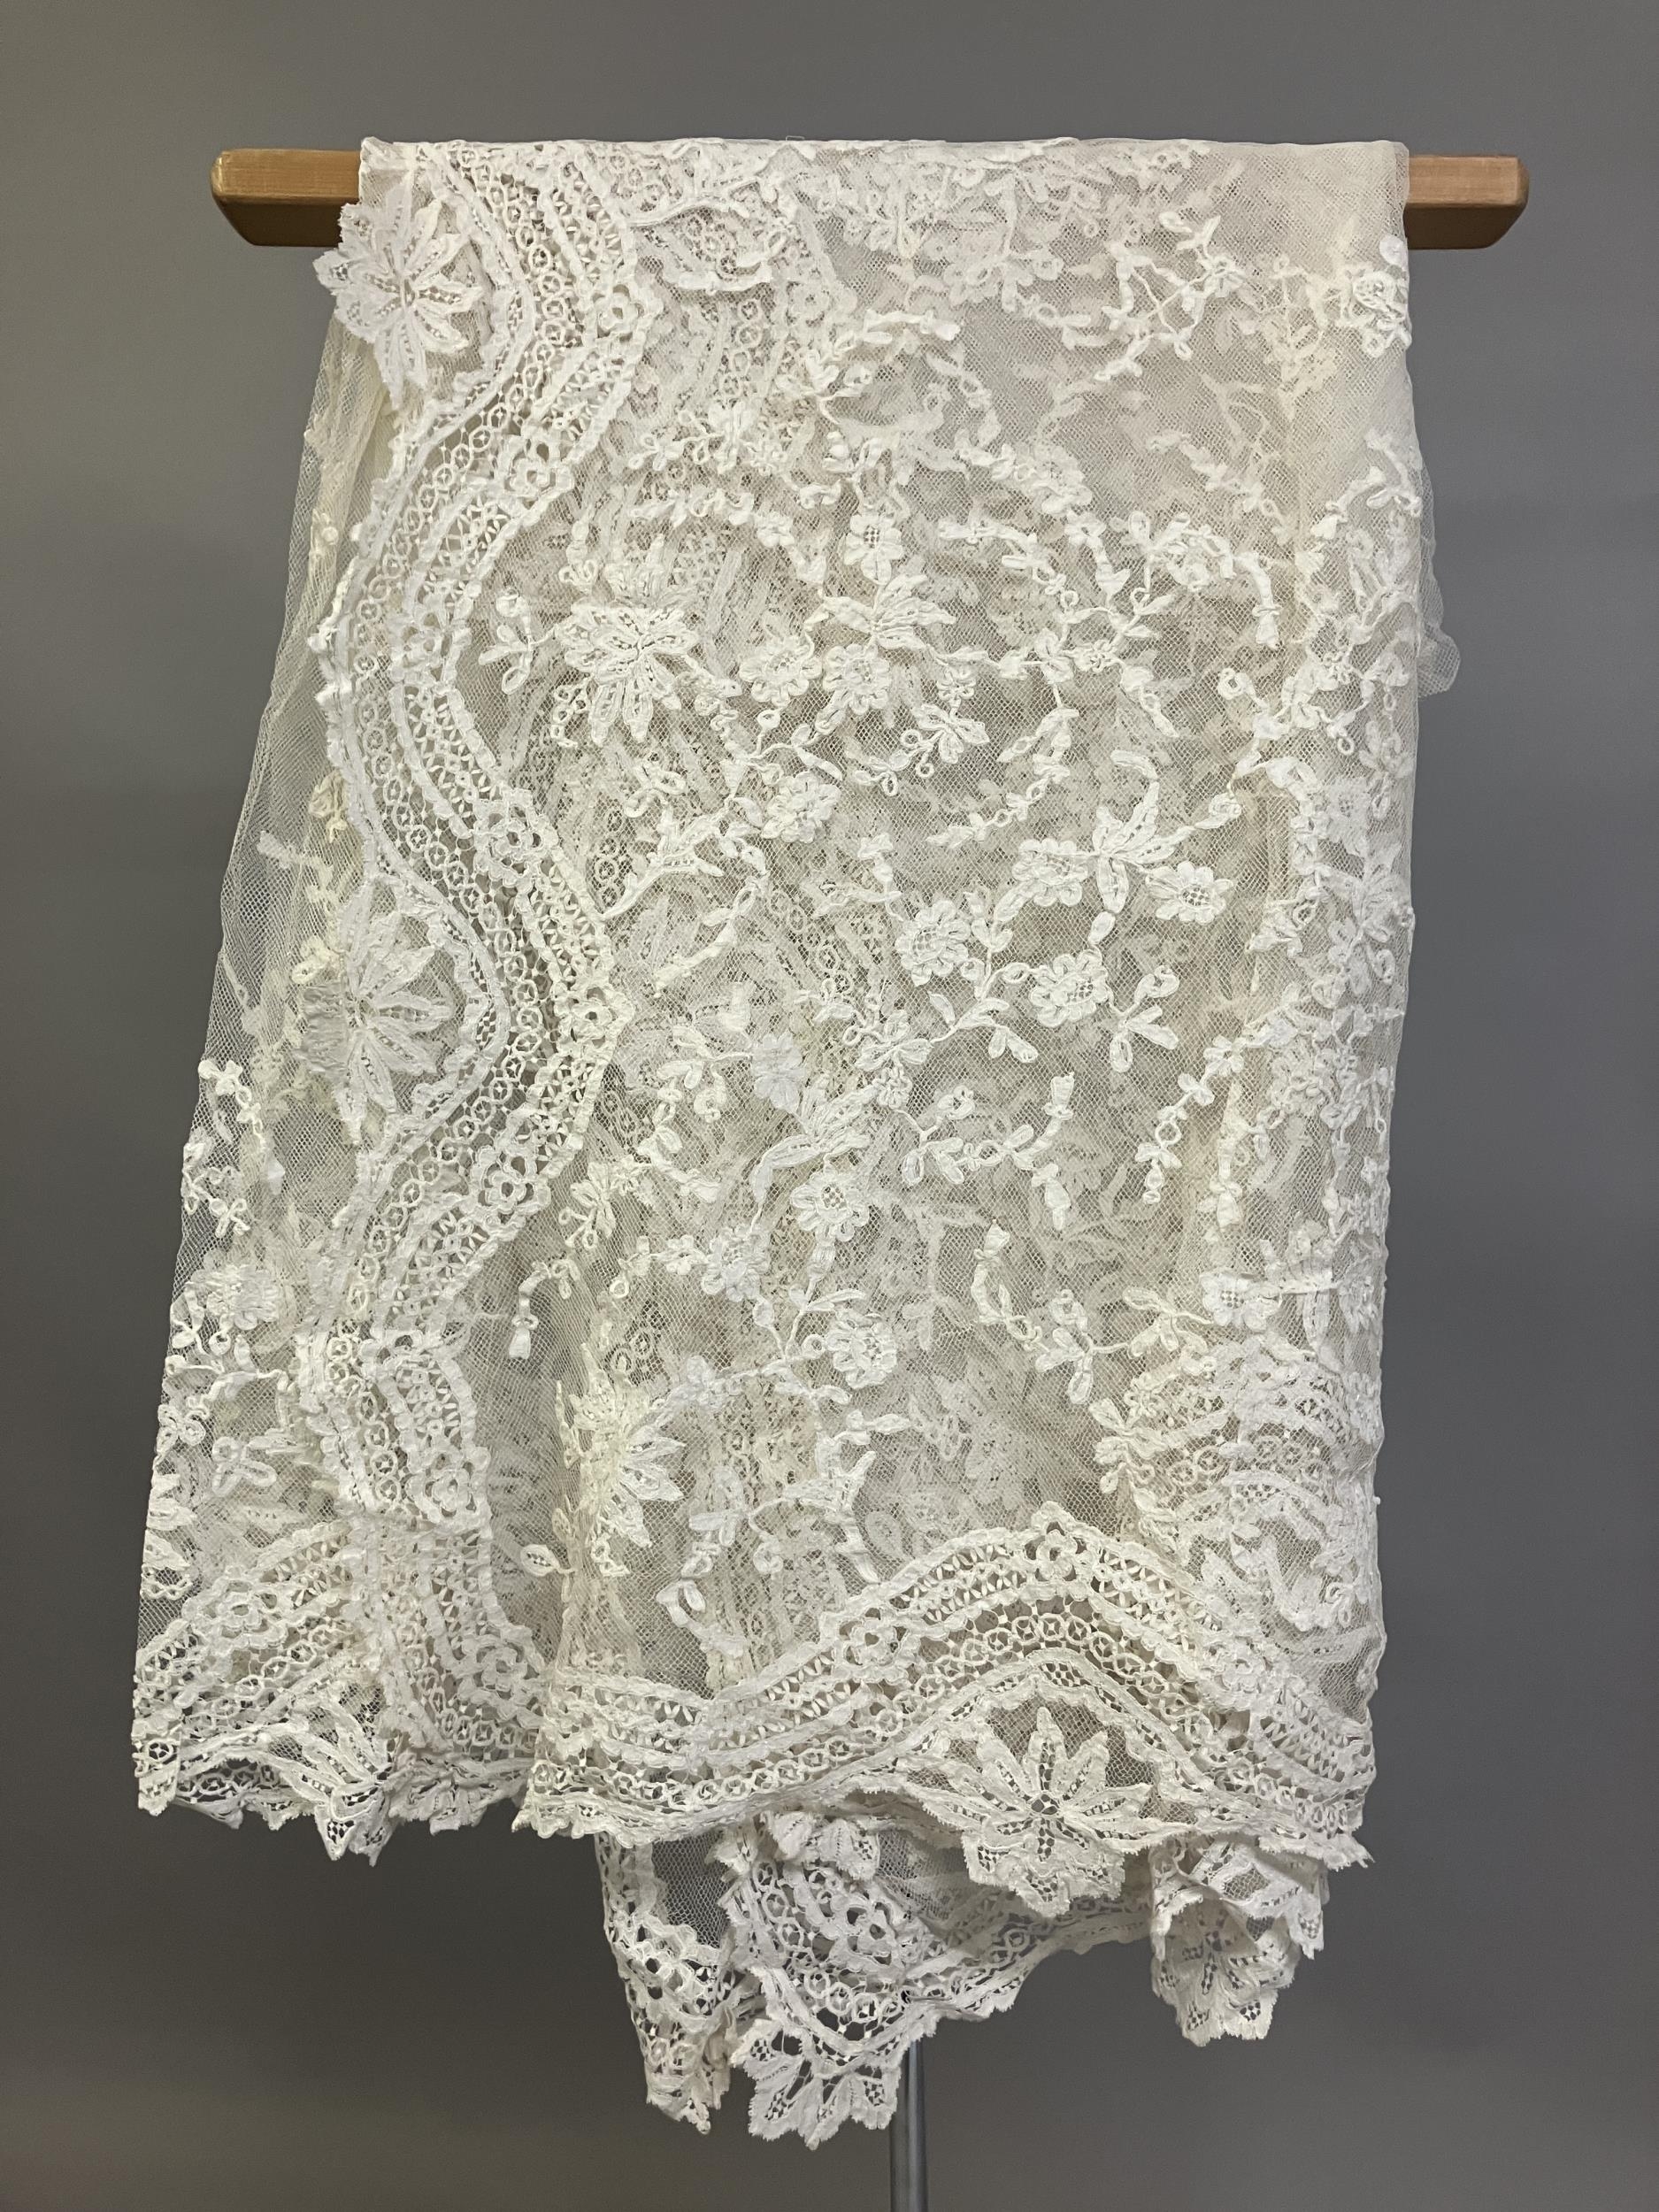 Antique Lace: an elaborate late 19th century Honiton lace wedding veil, the net densely applied with